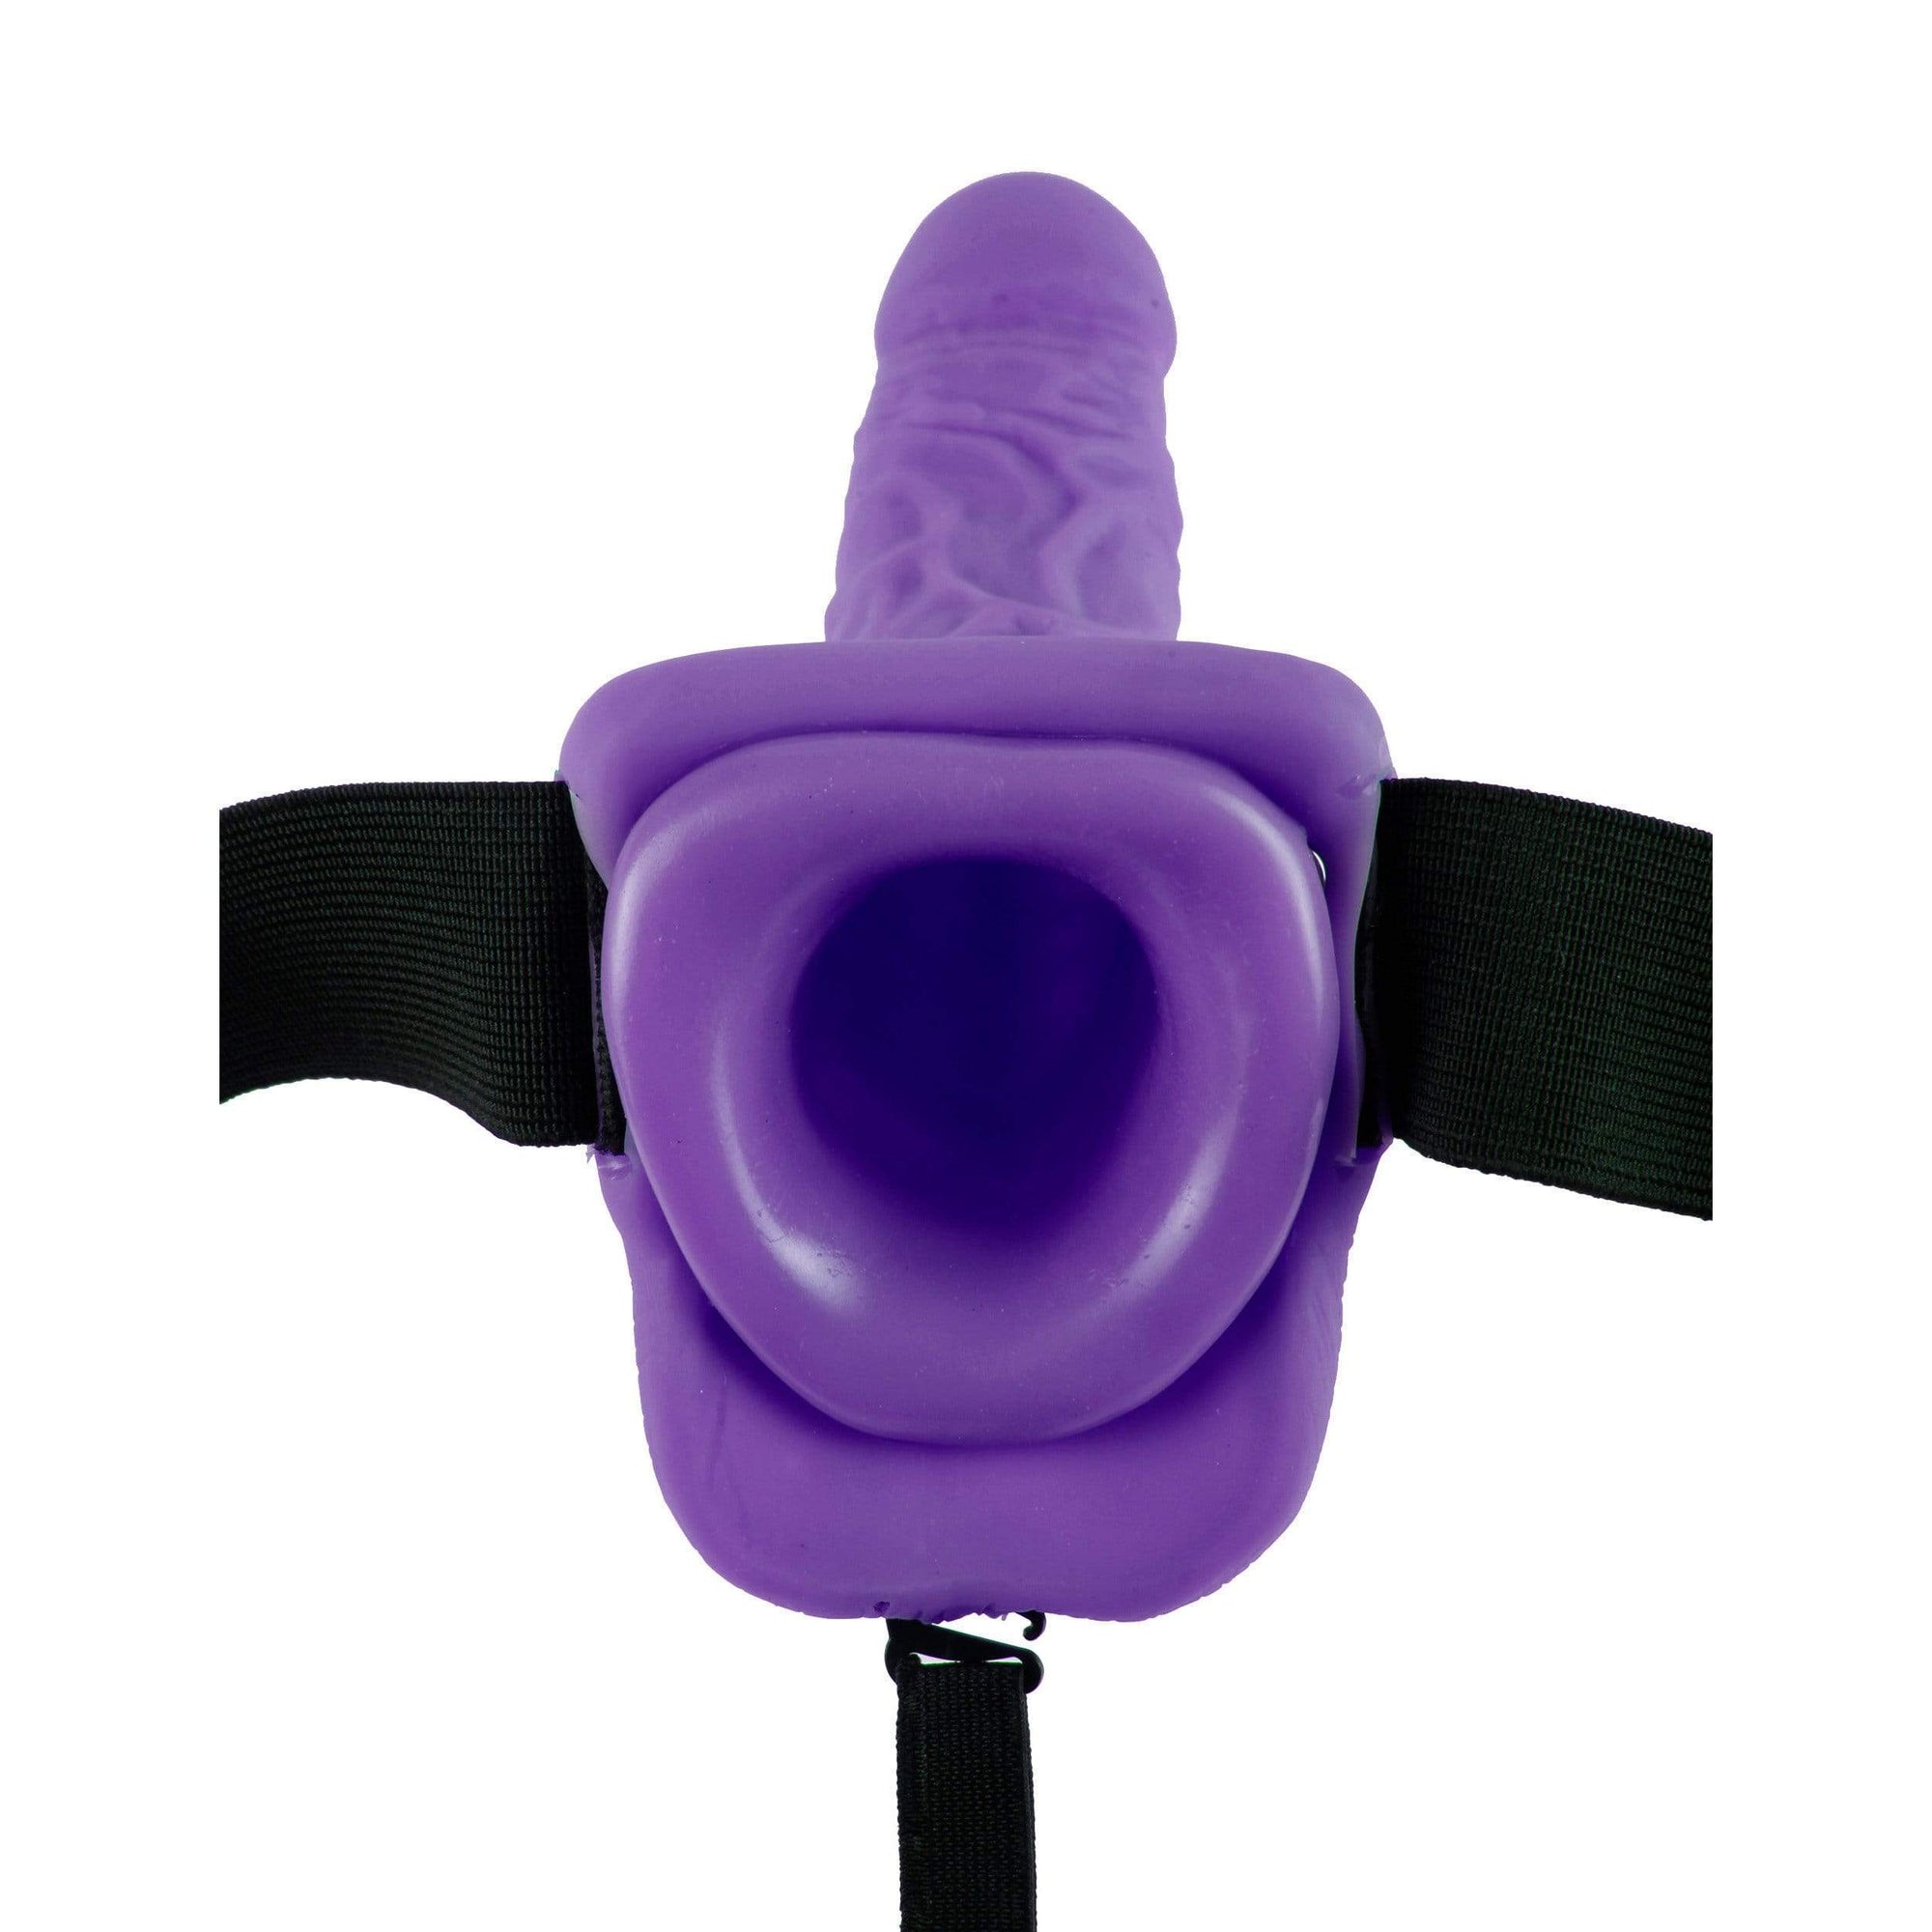 Pipedream - Fetish Fantasy Series Hollow Strap On with Balls 7" (Purple) Strap On with Hollow Dildo for Male (Non Vibration) 319757712 CherryAffairs